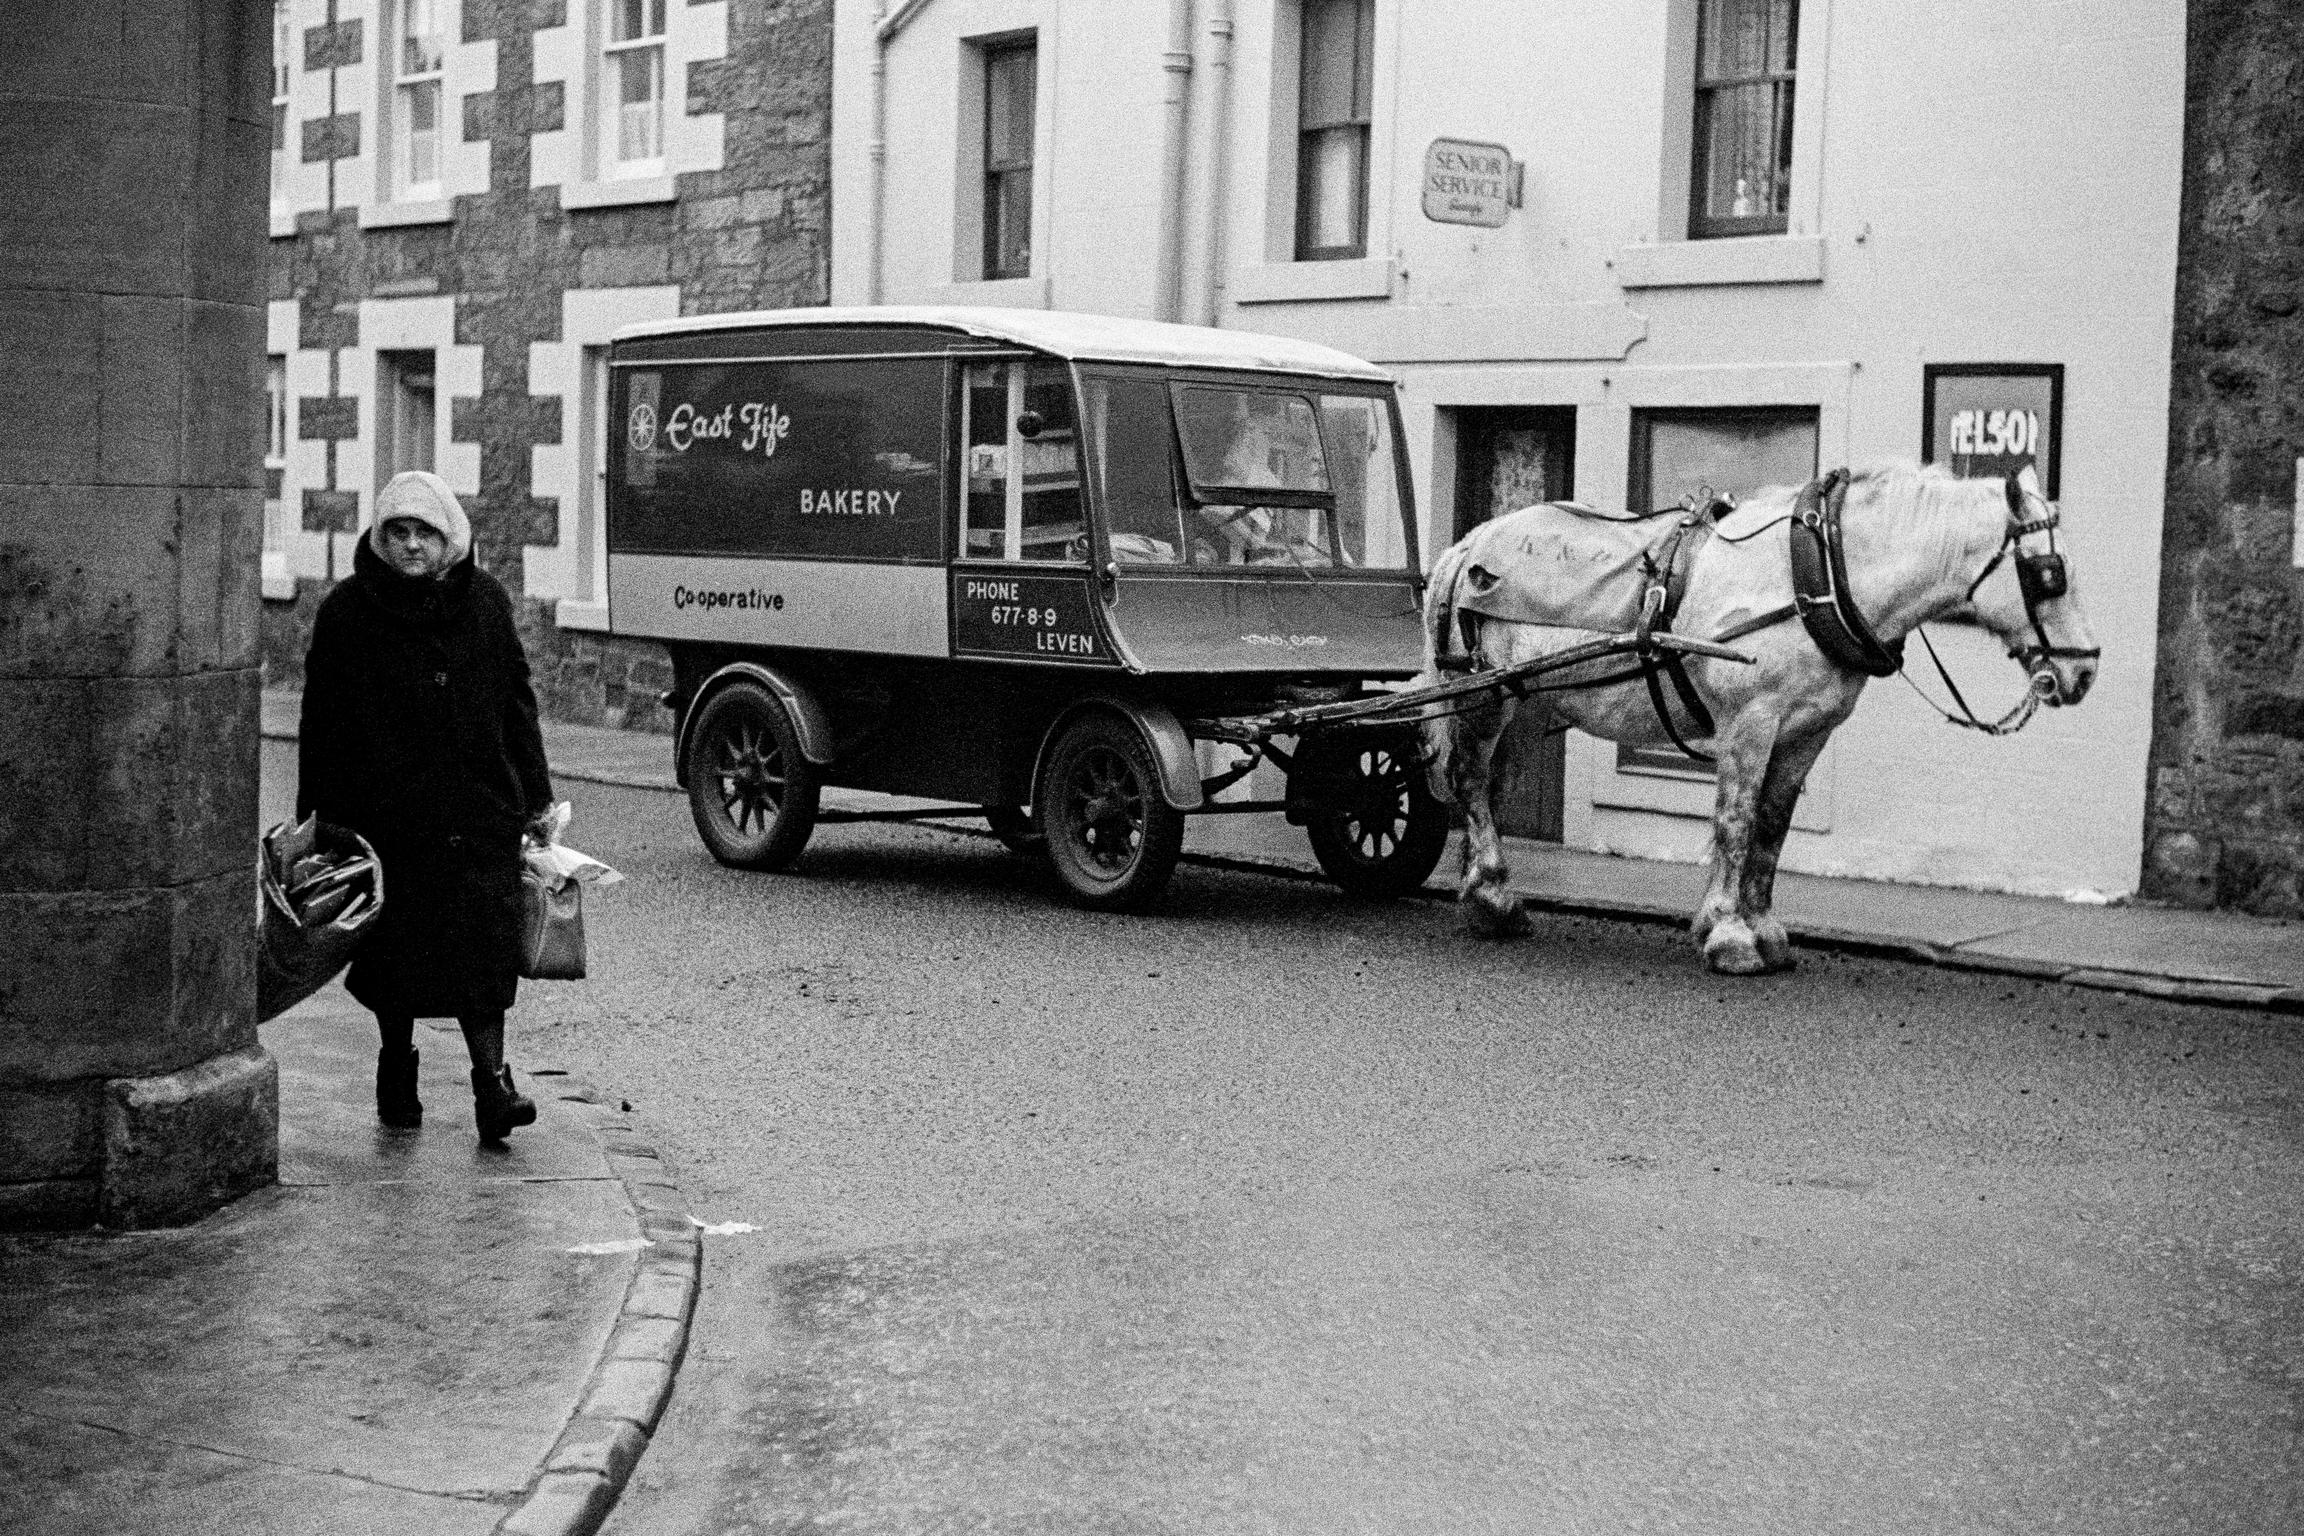 Shopping in Leven plus horse-van bakery delivery. Scotland